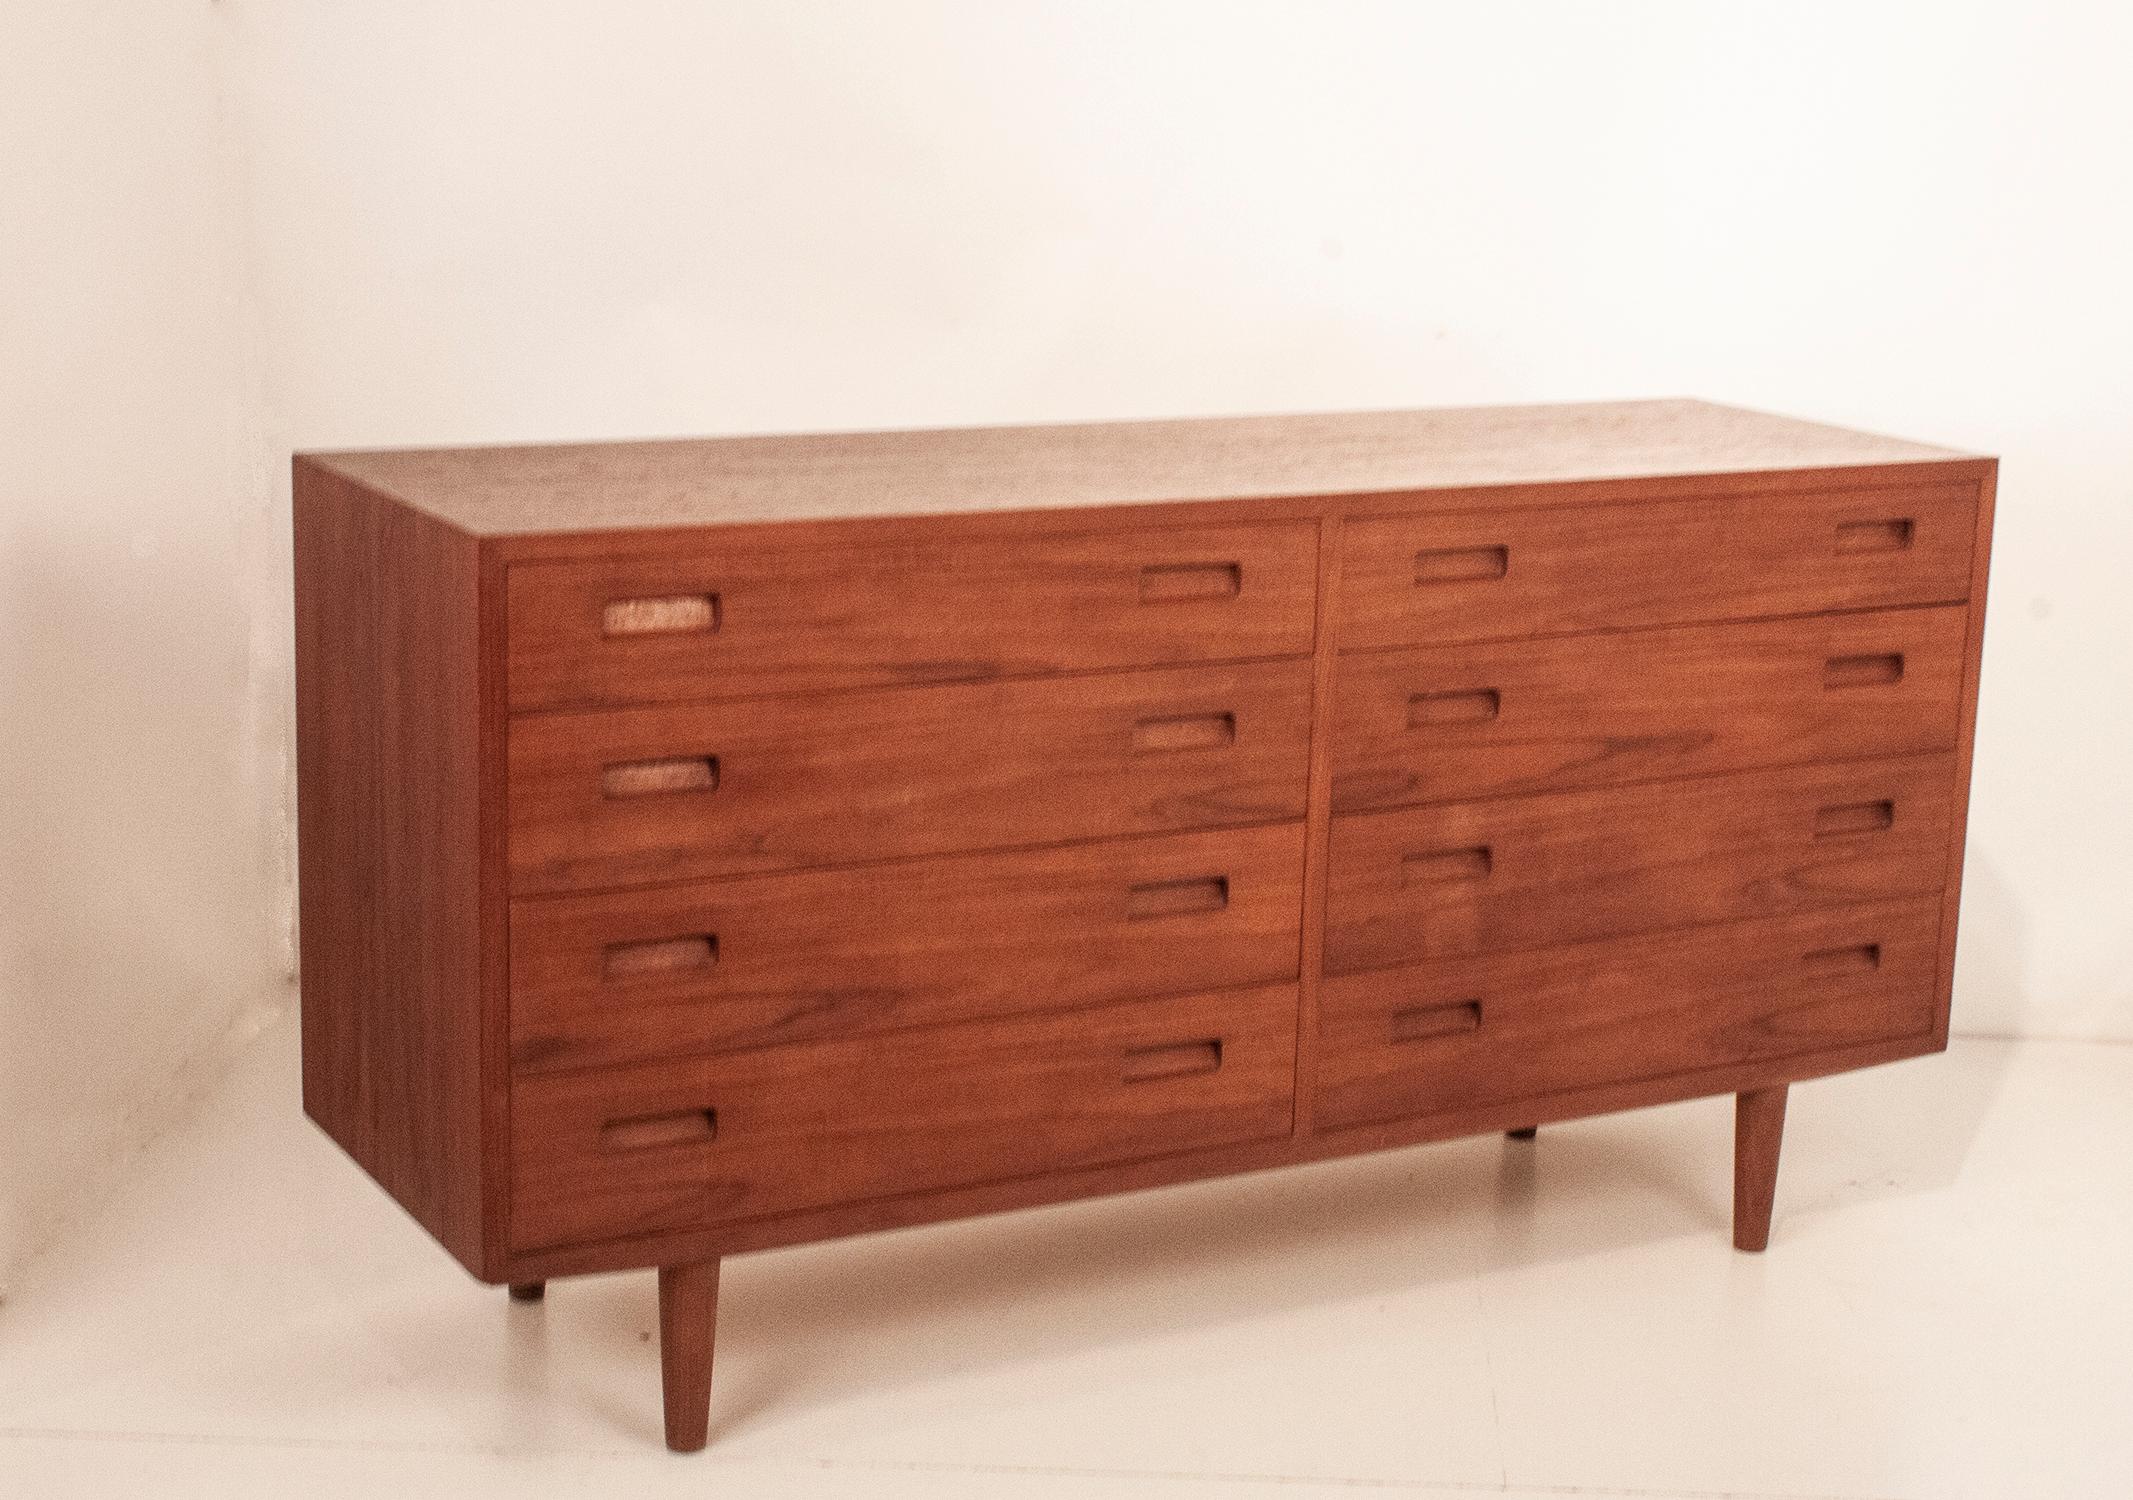 Mid-Century Modern Danish Chest of Drawers Teak Wood by Carlo Jensen for Hundevad, 1950s For Sale